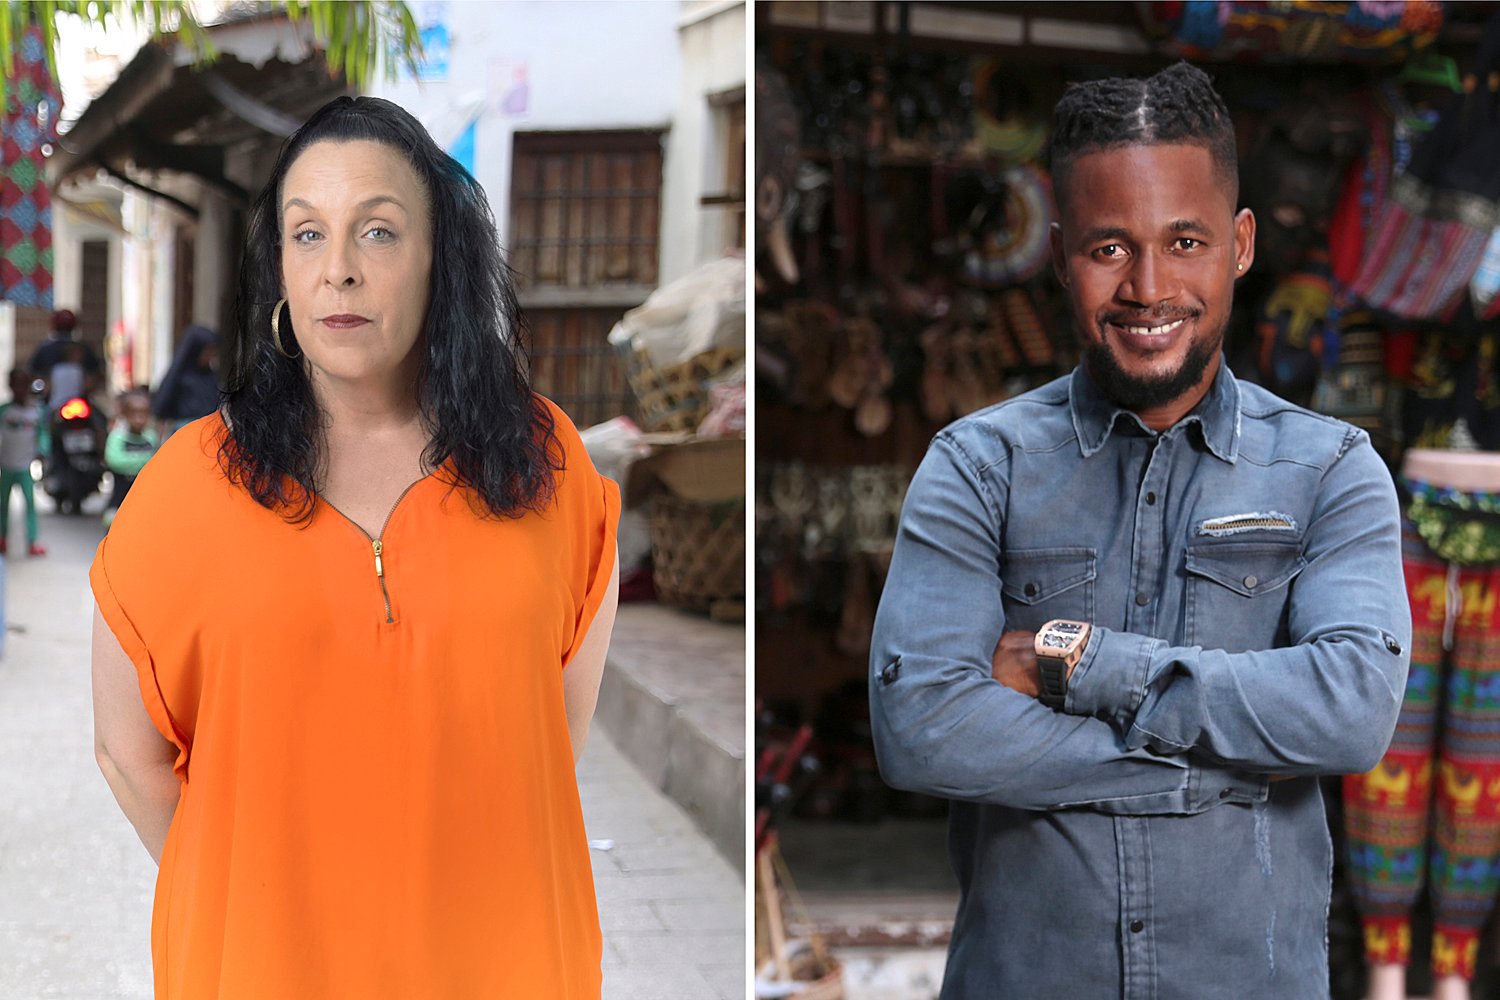 'Before the 90 Days' Season 5 stars Kimberly, seen here in a bright orange top, and Usman 'Sojayboy' in a denim button down